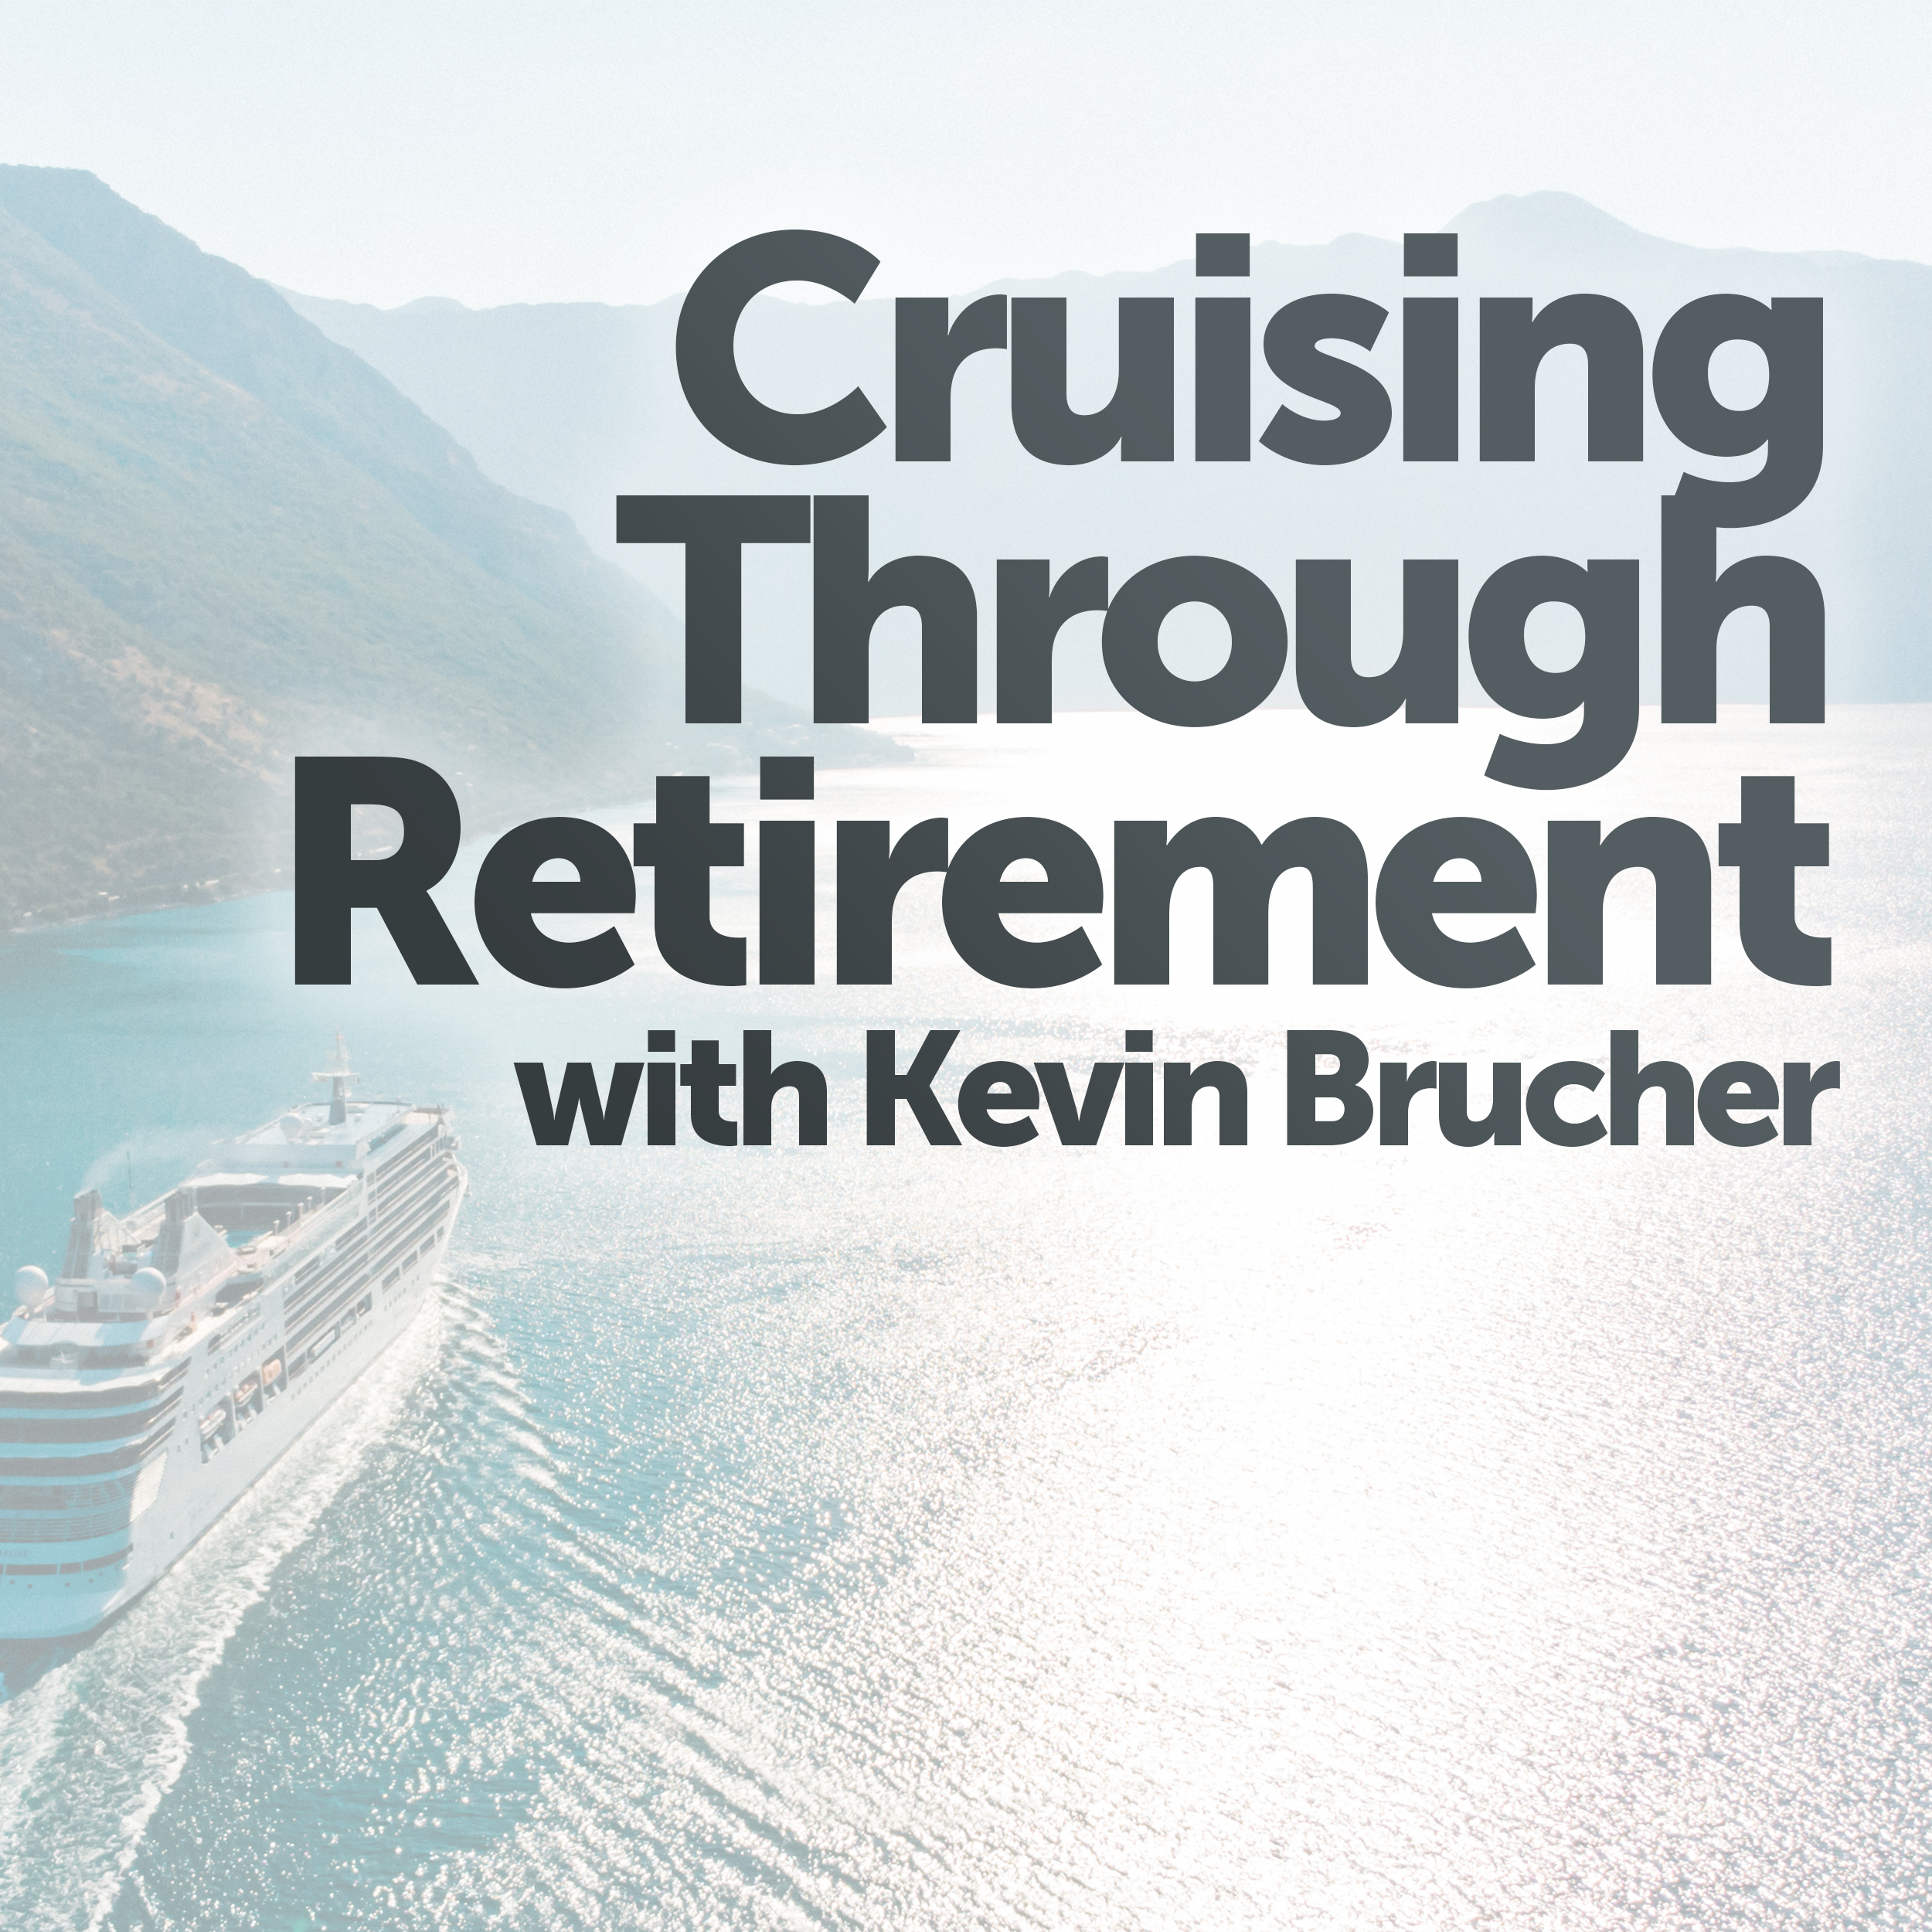 Cruising Through Retirement This week Kevin Brucher has some ideas to help you avoid some of the risks as you head toward retirement.